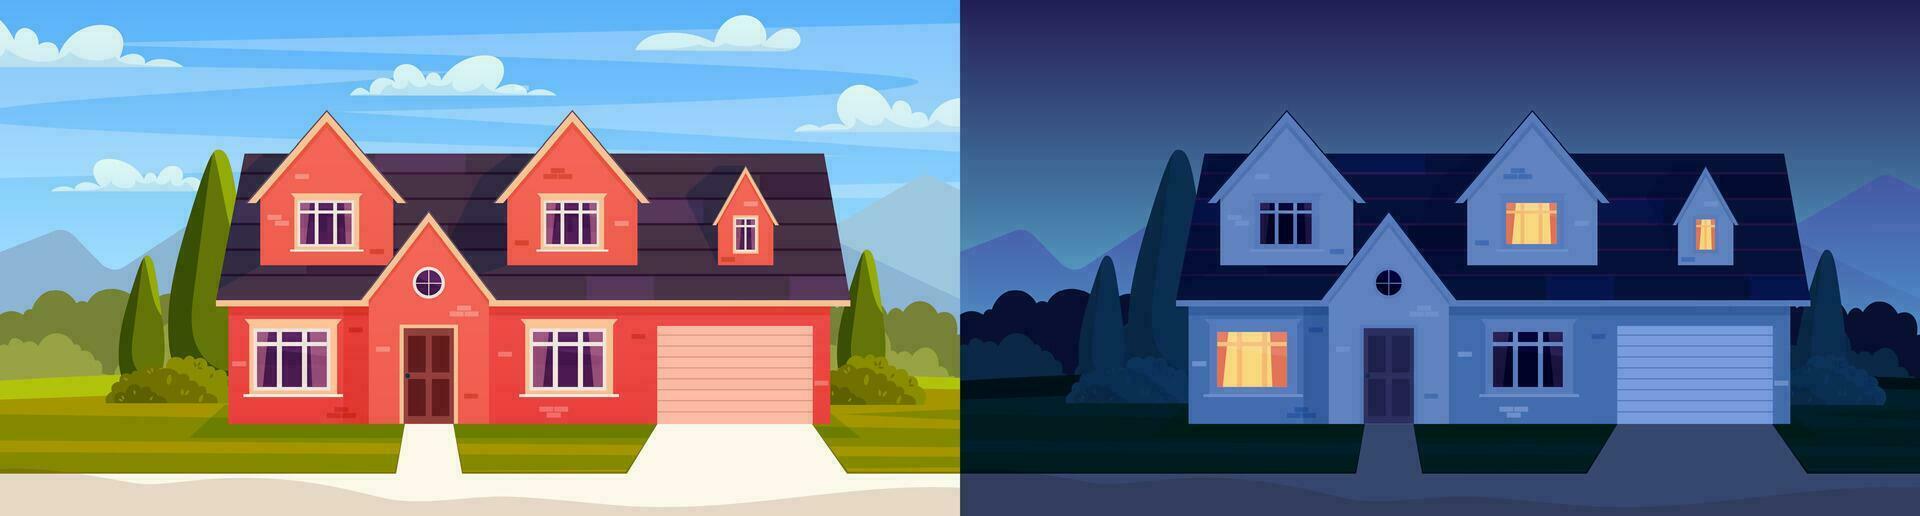 Day and night house. Street in suburb district with residential house. cartoon landscape with suburban cottage. City neighborhood with real estate property. Vector illustration in a flat style